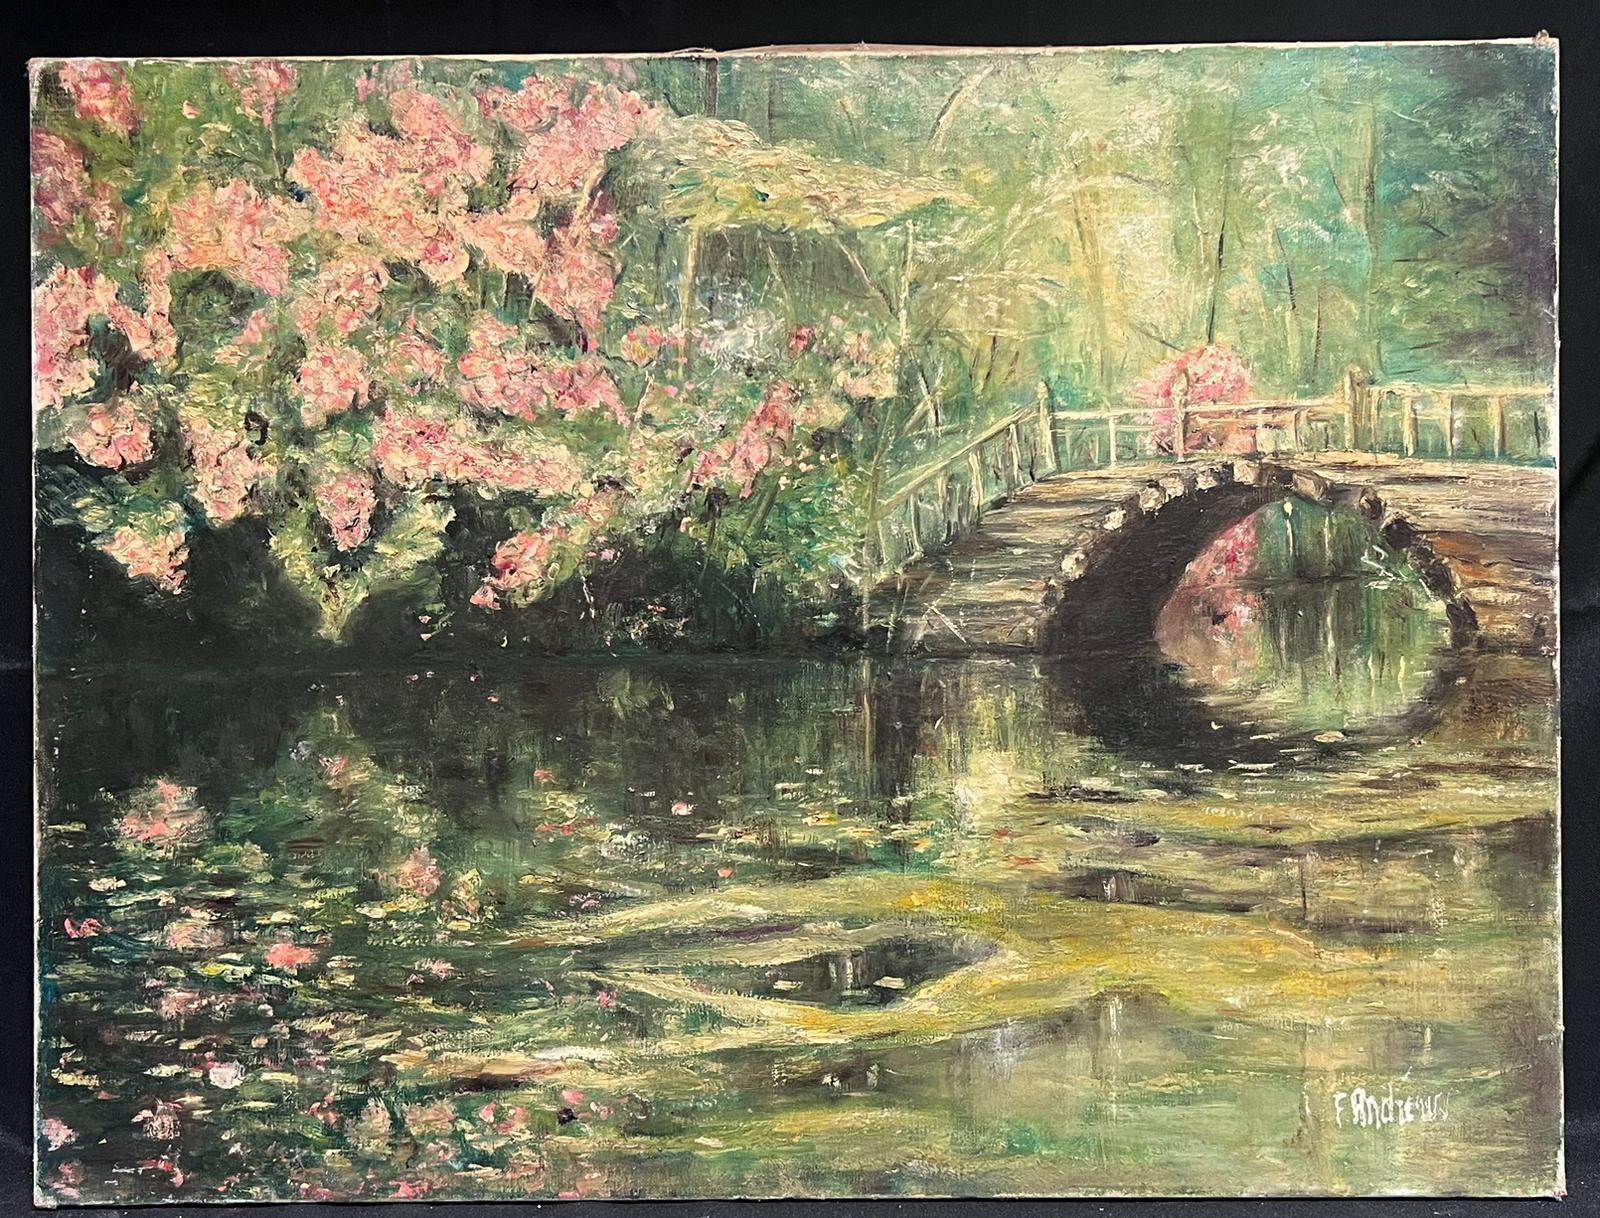 Blossom over the Lake
French School, indistinctly signed 
mid 20th century
oil on canvas, unframed
canvas: 18 x 24 inches
provenance: private collection, France
condition: good and sound condition but with some surface scuffs and markings. 